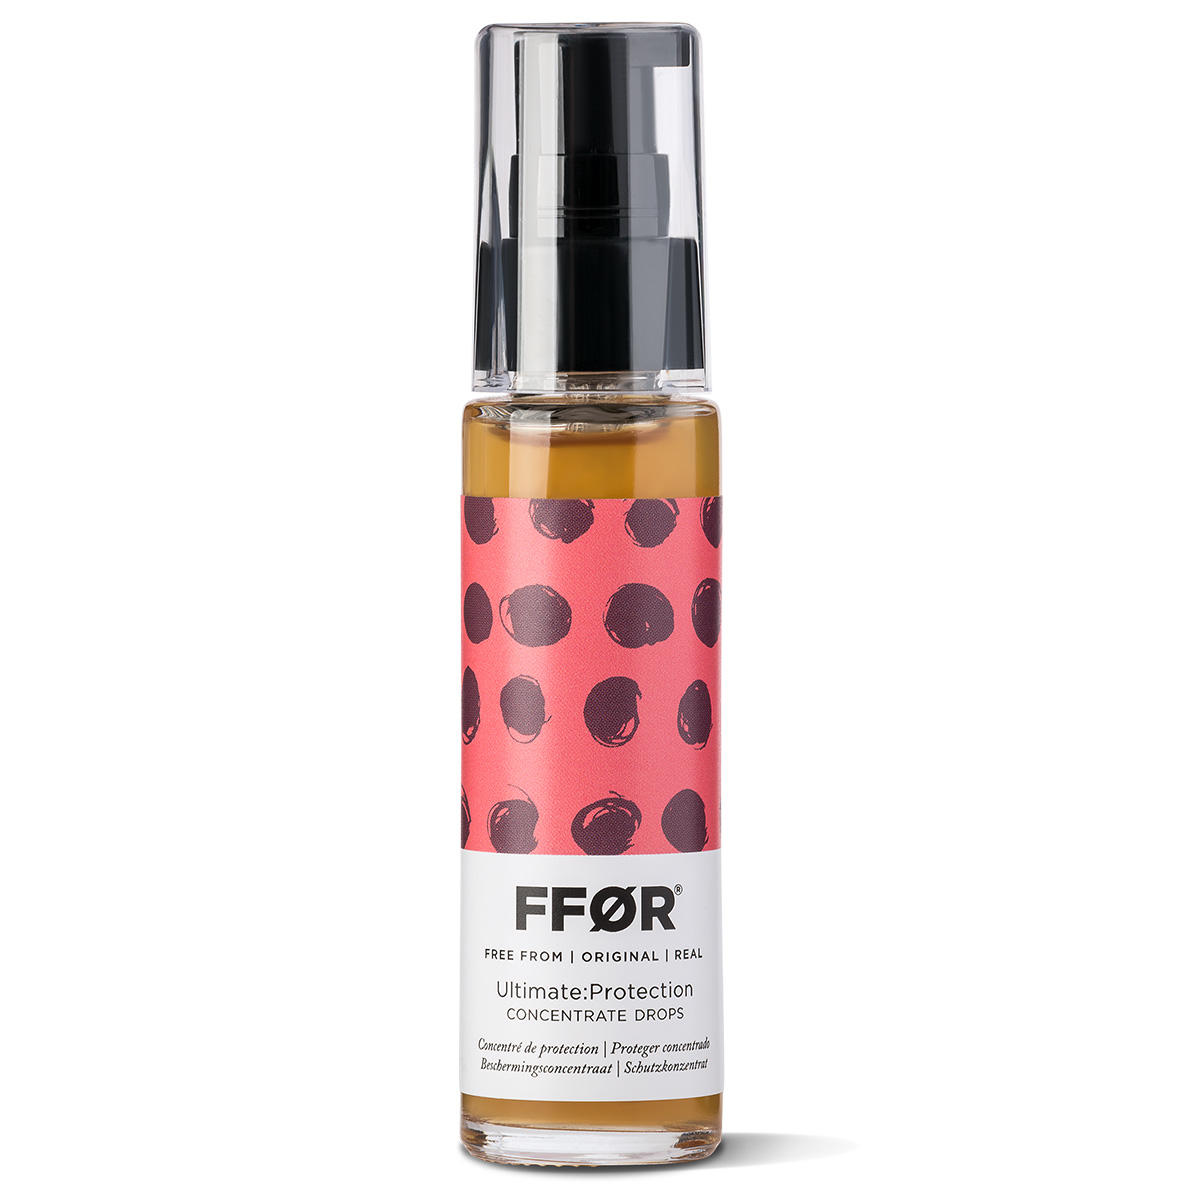 FFOR ULTIMATE:Protection Concentrate Drops 30 ml - 1